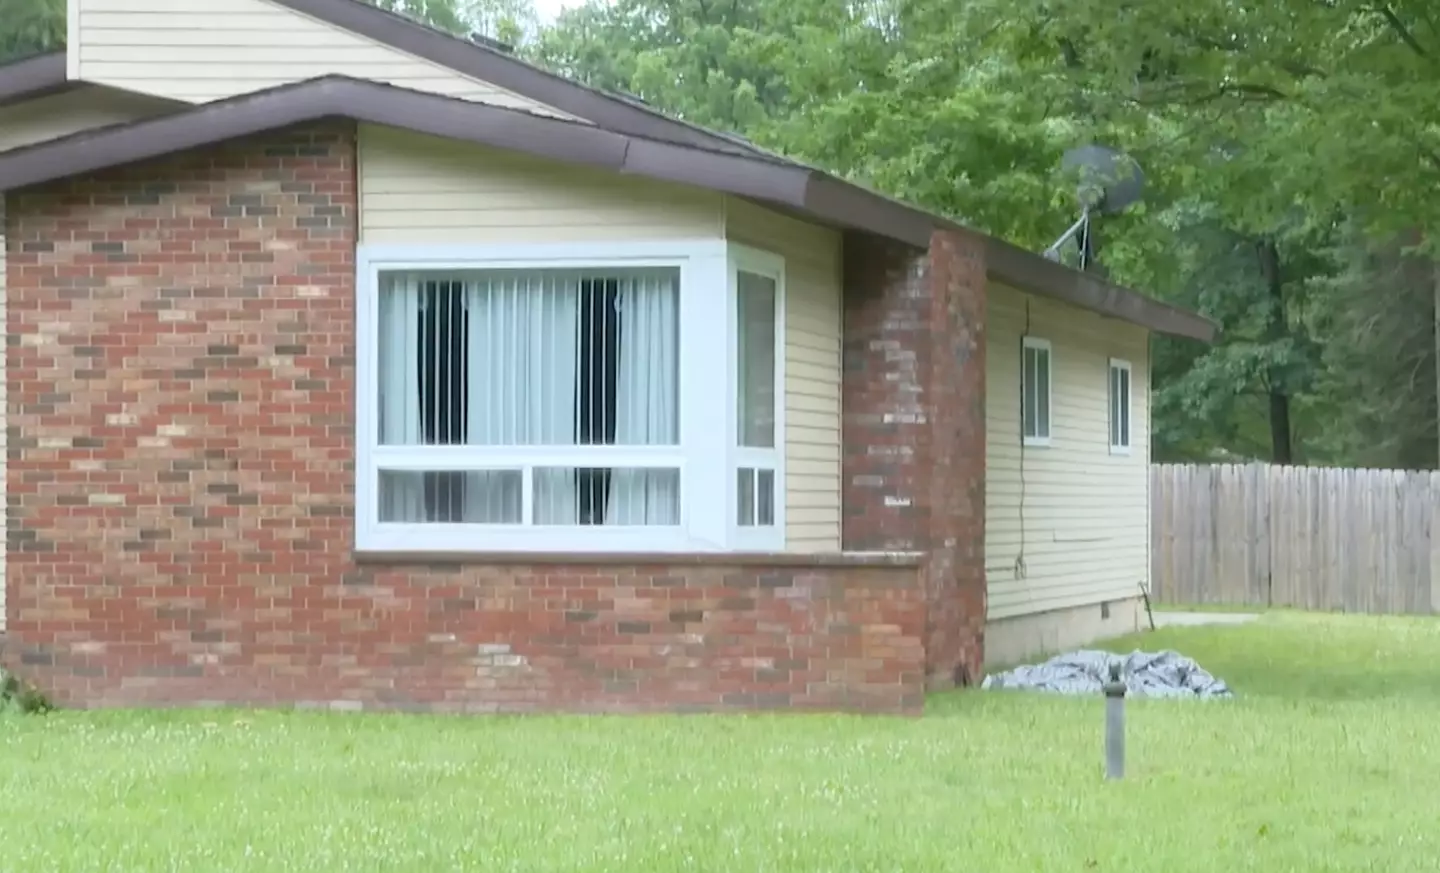 The family members were found dead at a home in Michigan.